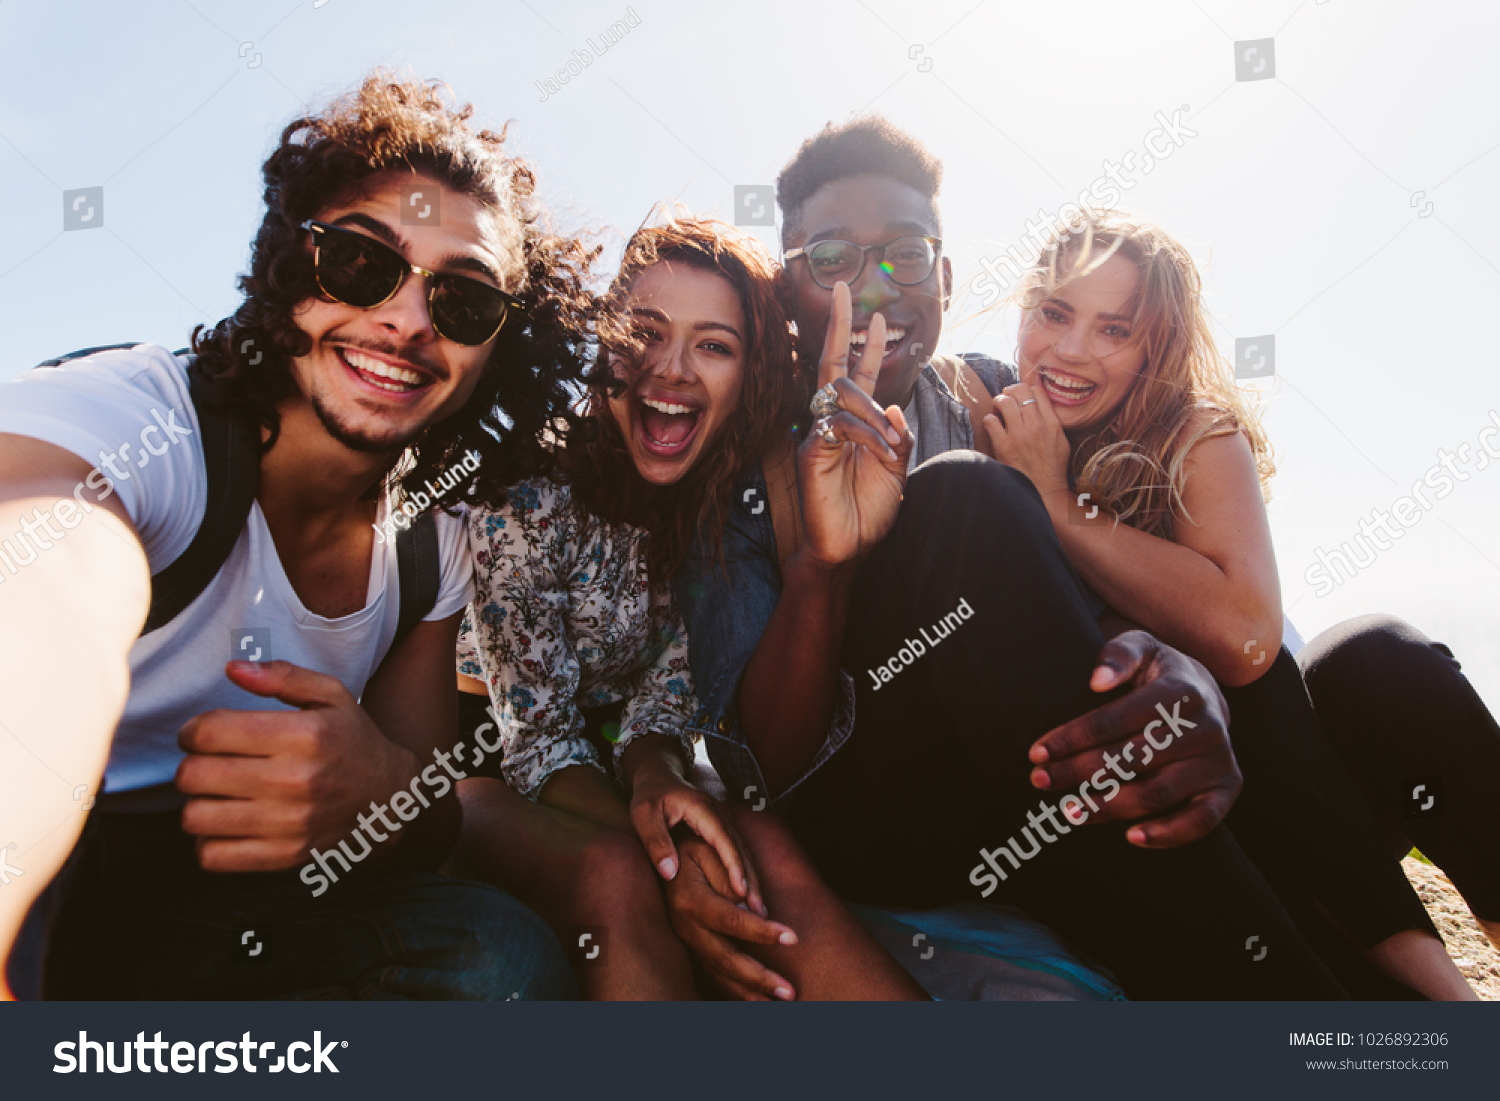 Excited young friends taking selfie outdoors. Diverse group of men and women sitting together and taking self portrait on their holiday. #1026892306